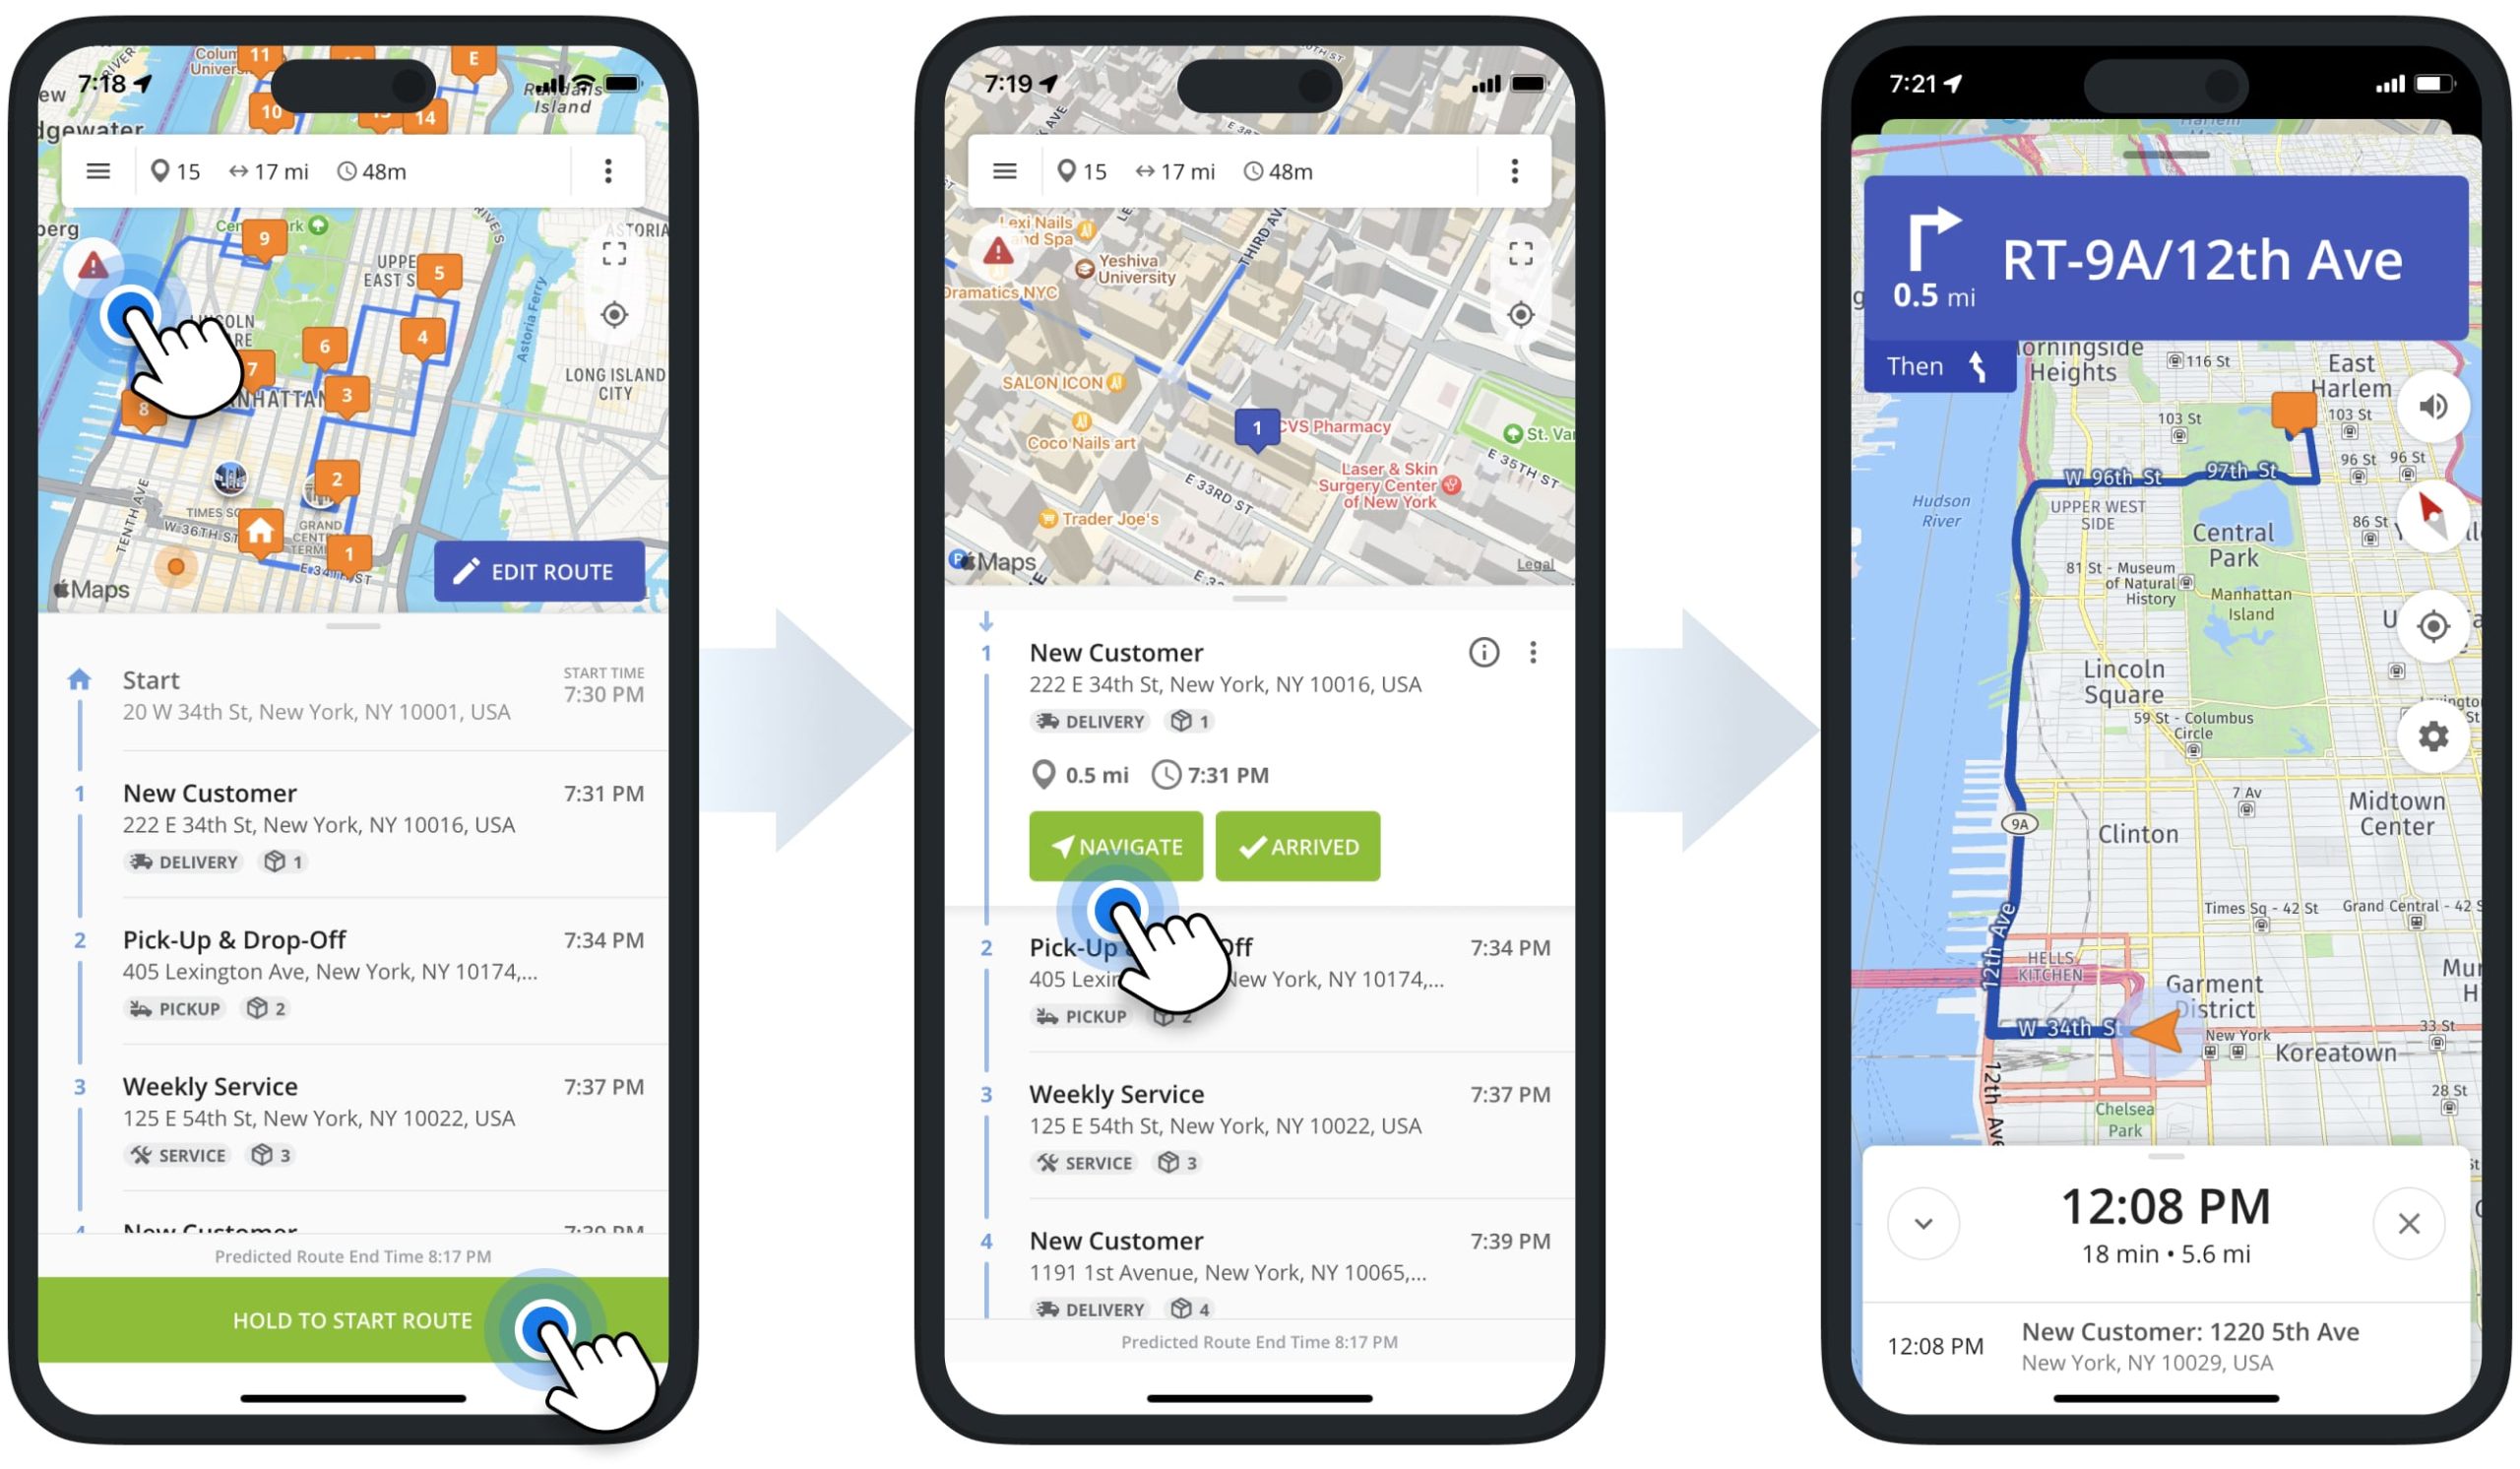 Using offline GPS route navigation for navigating multi-address routes without an internet connection on Route4Me's iPhone Route Planner app.